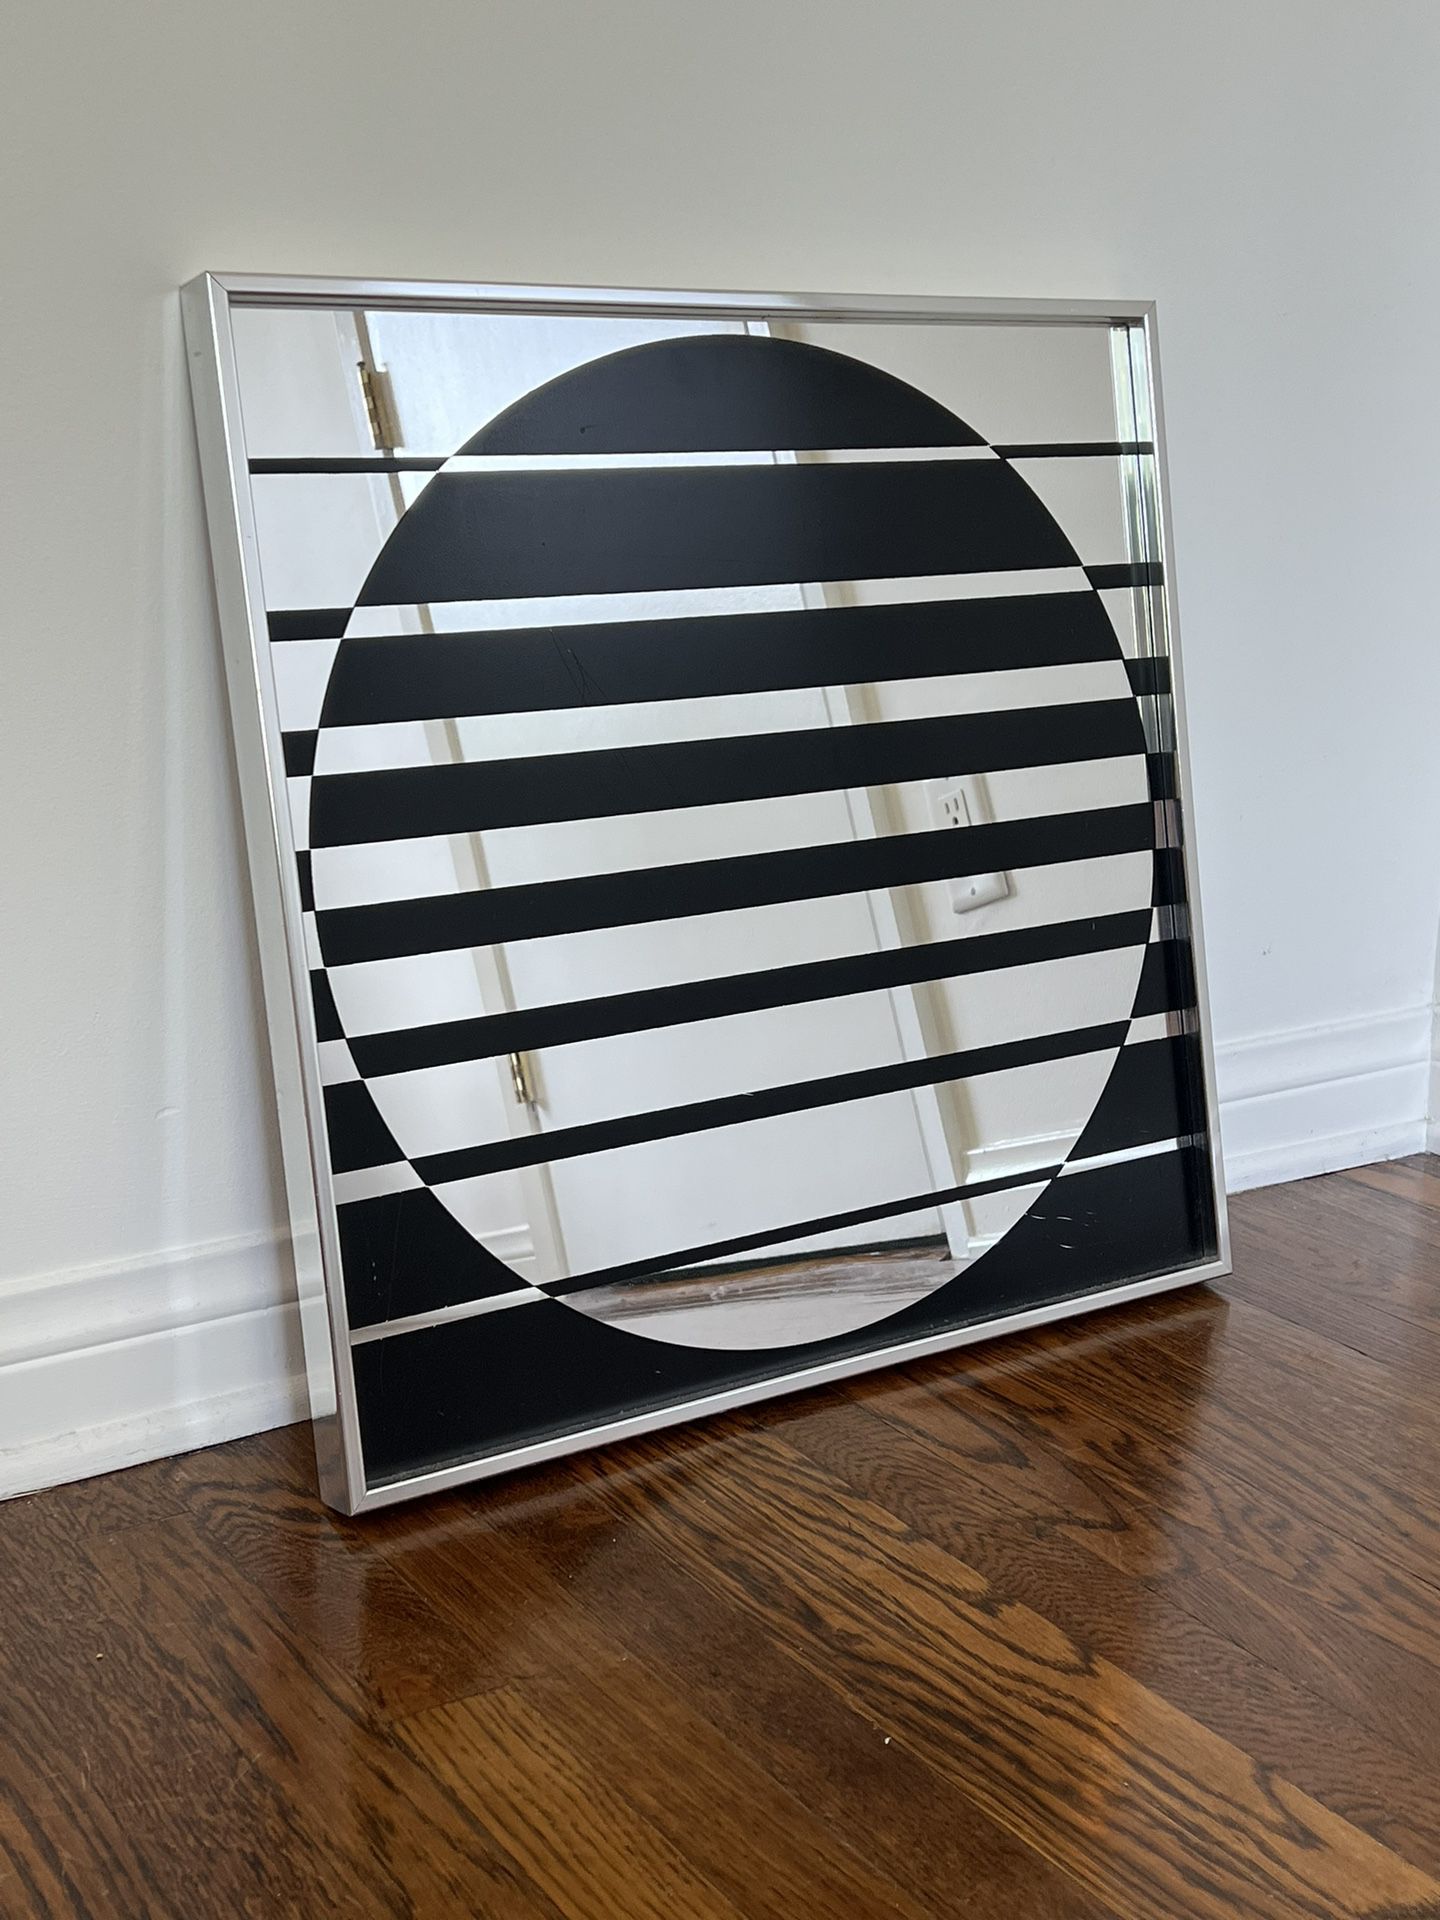 Authentic Tom True Printed Mirror for Sale in Los Angeles, CA - OfferUp